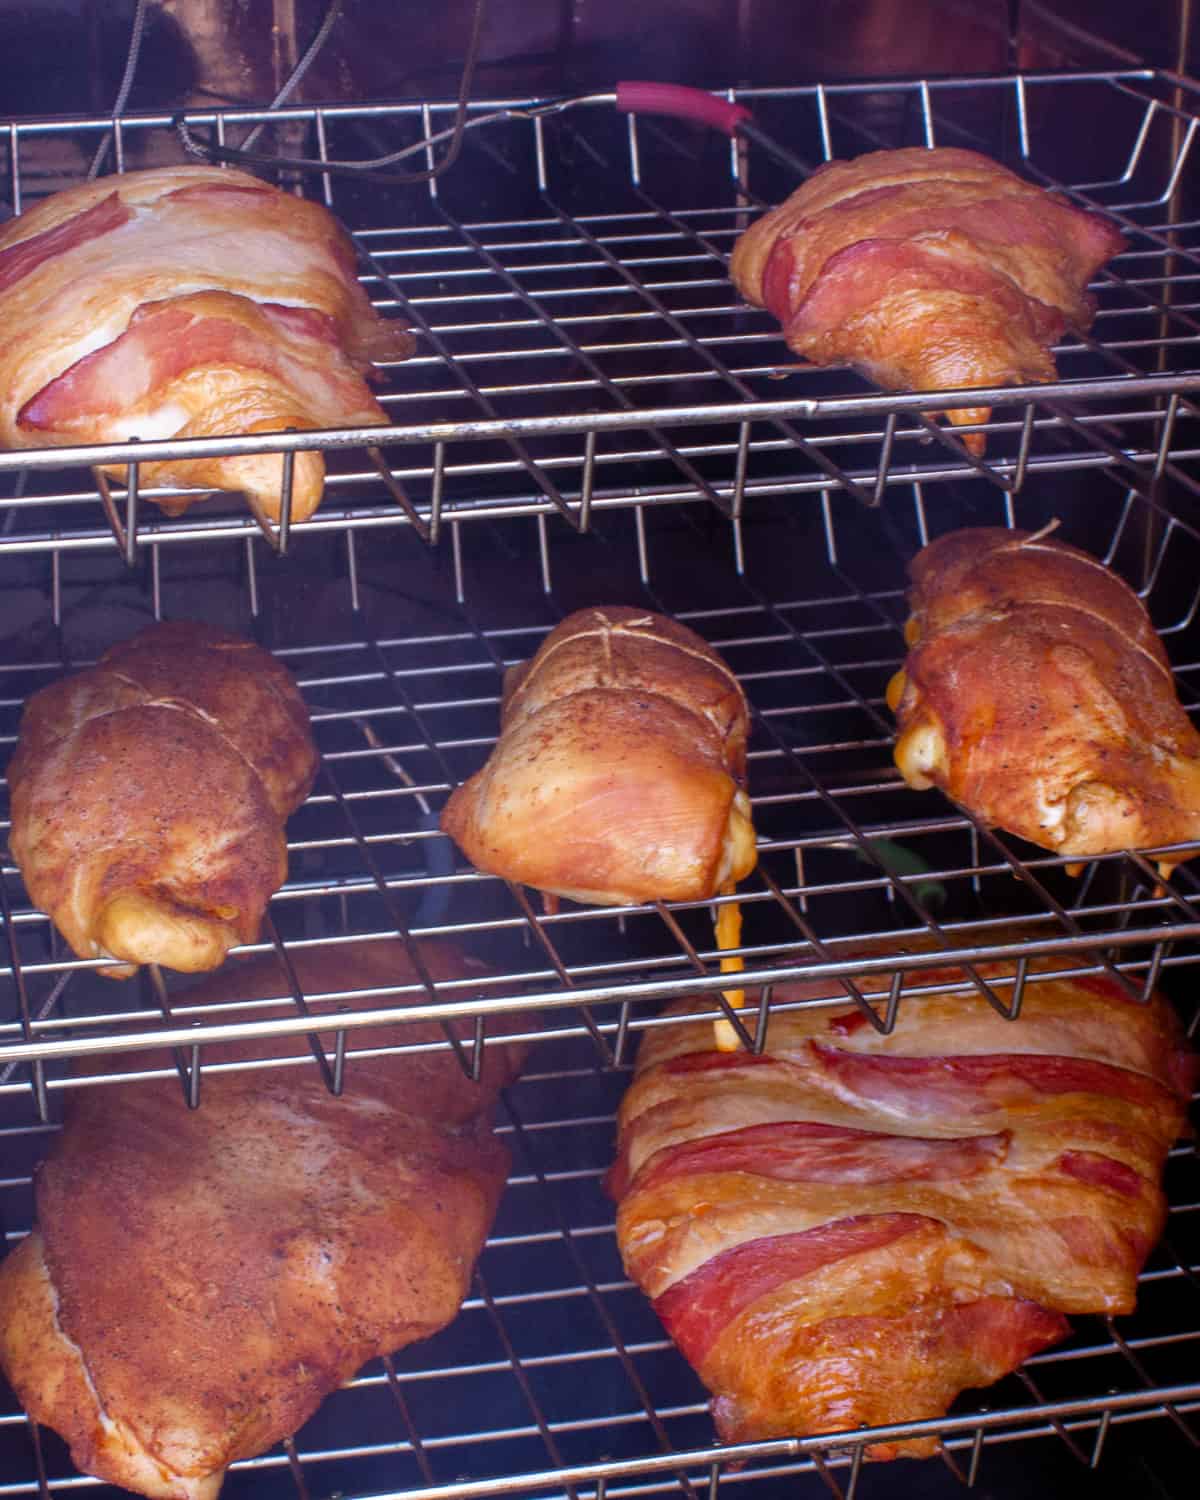 A smoker filled with chicken that have been smoking for a while already.